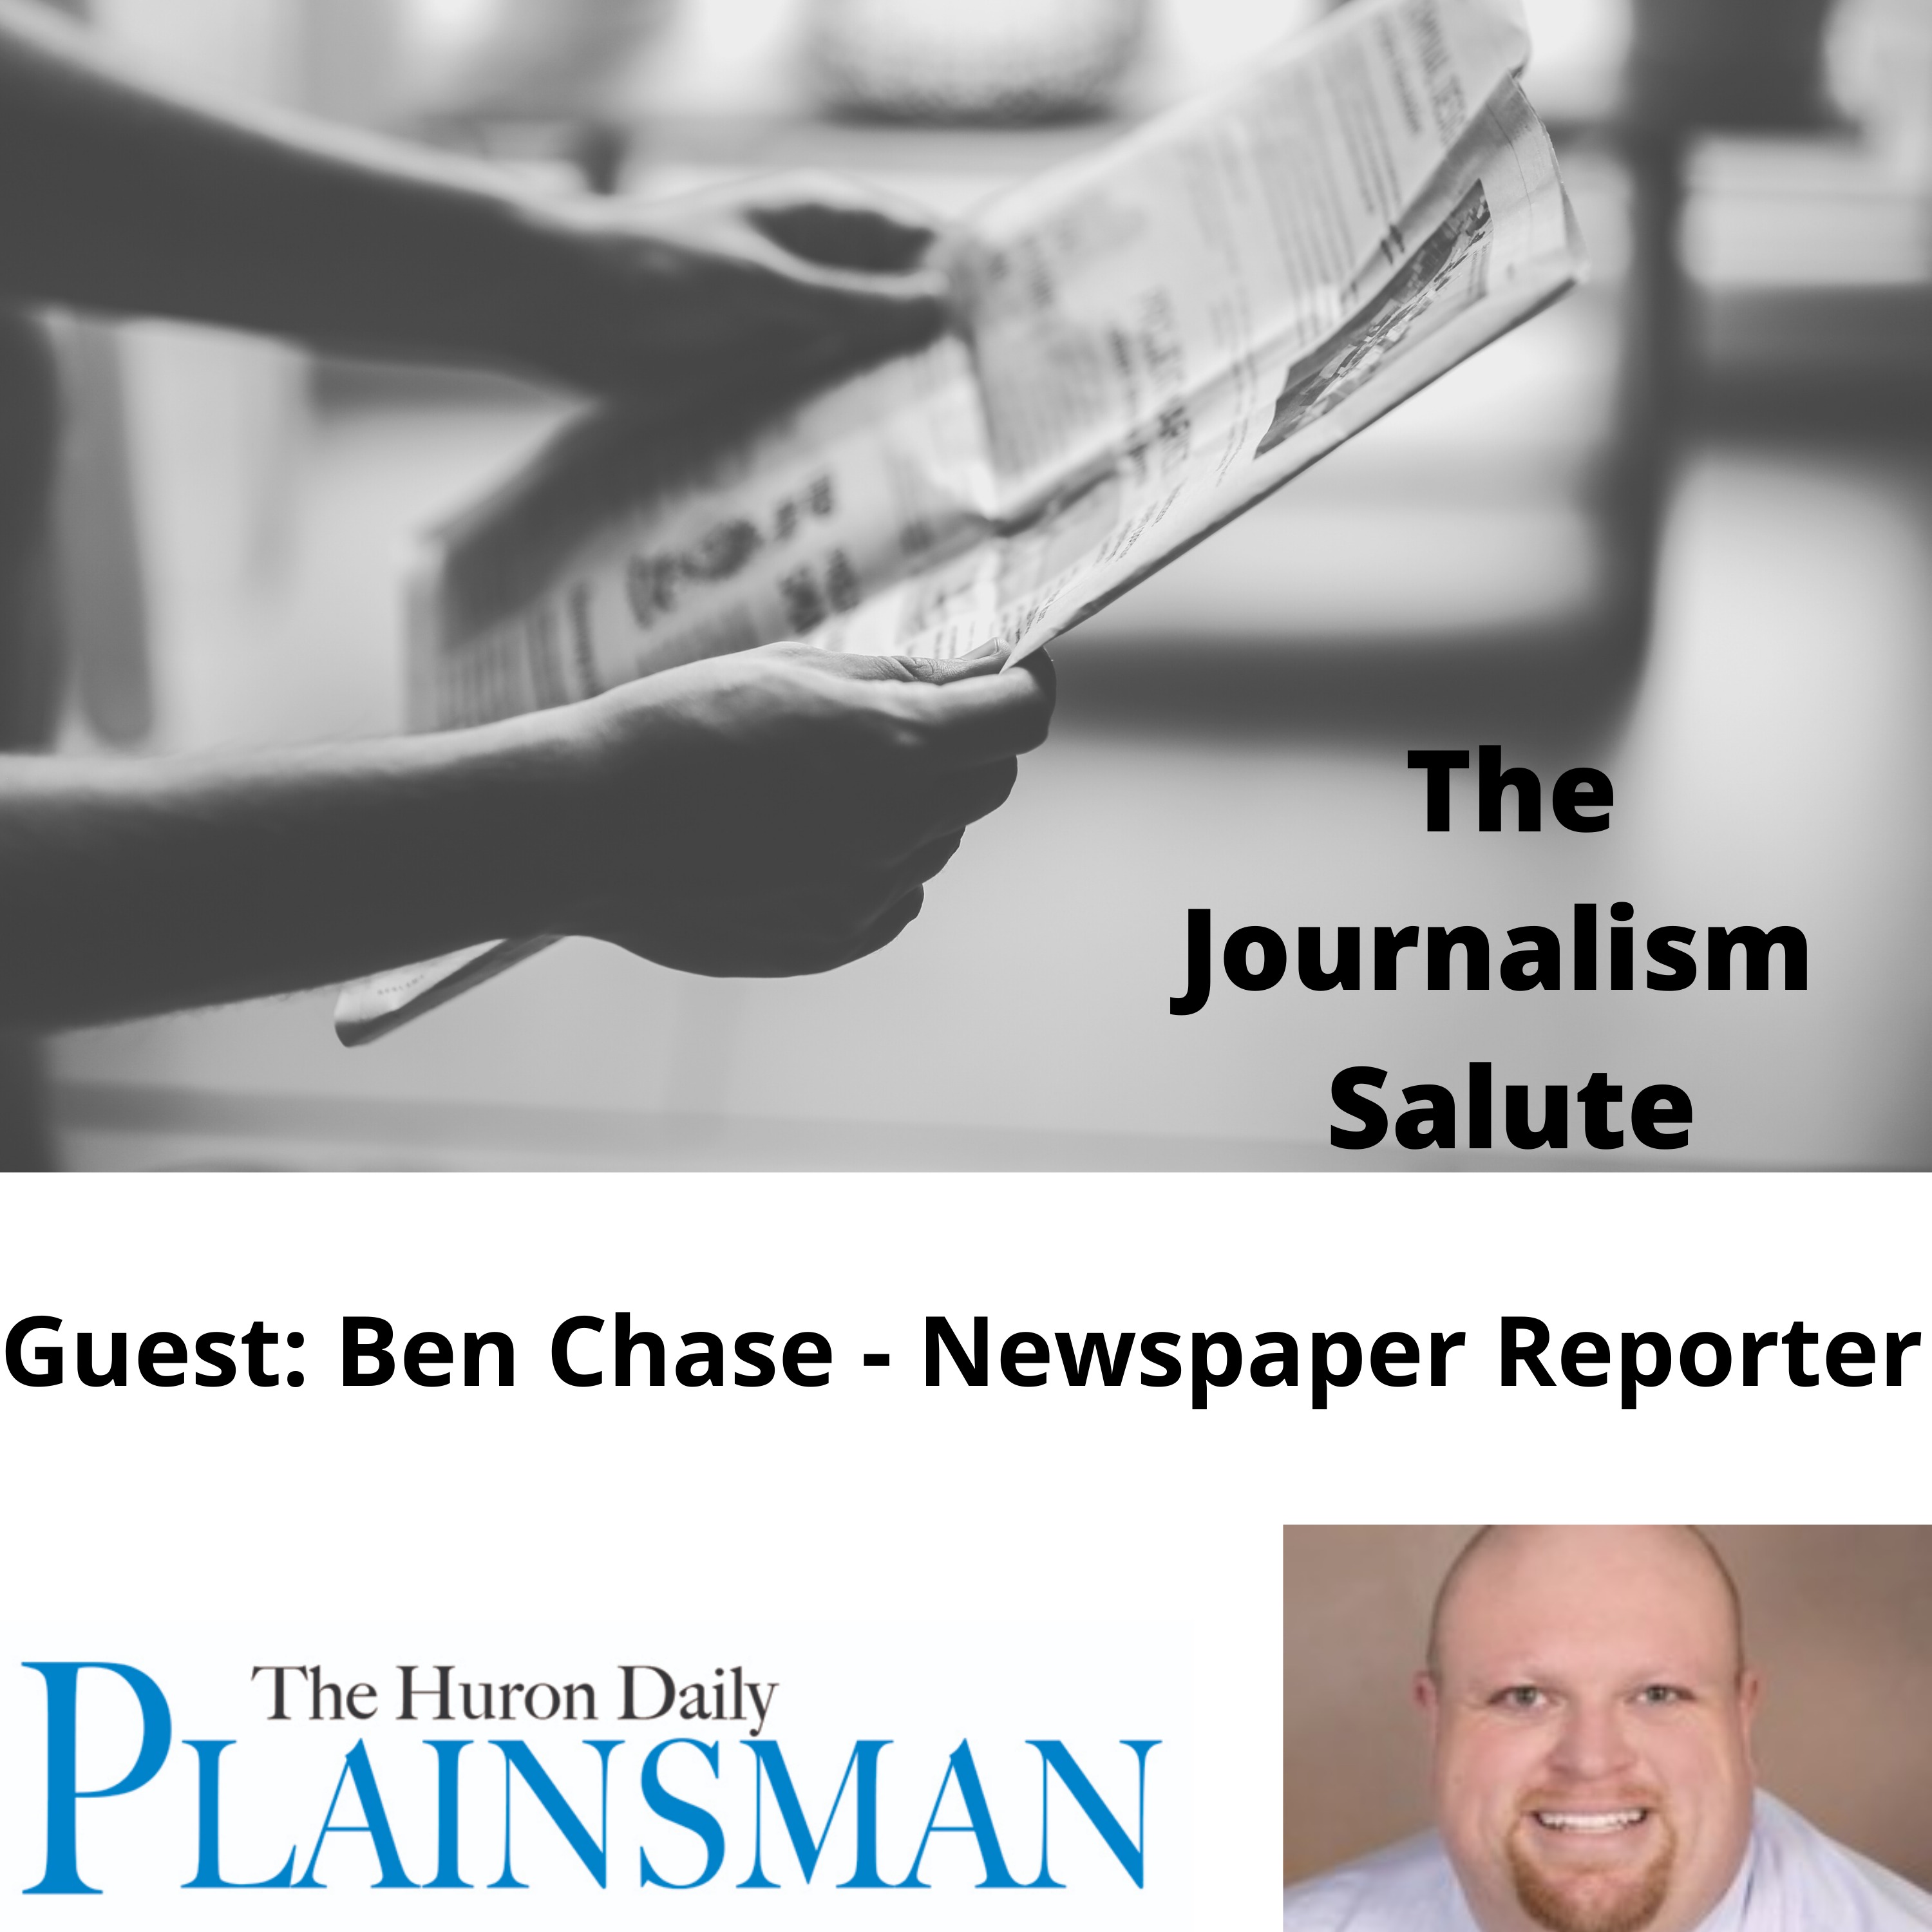 Ben Chase: From Social Worker to Small-Town Journalist for The Huron Daily Plainsman